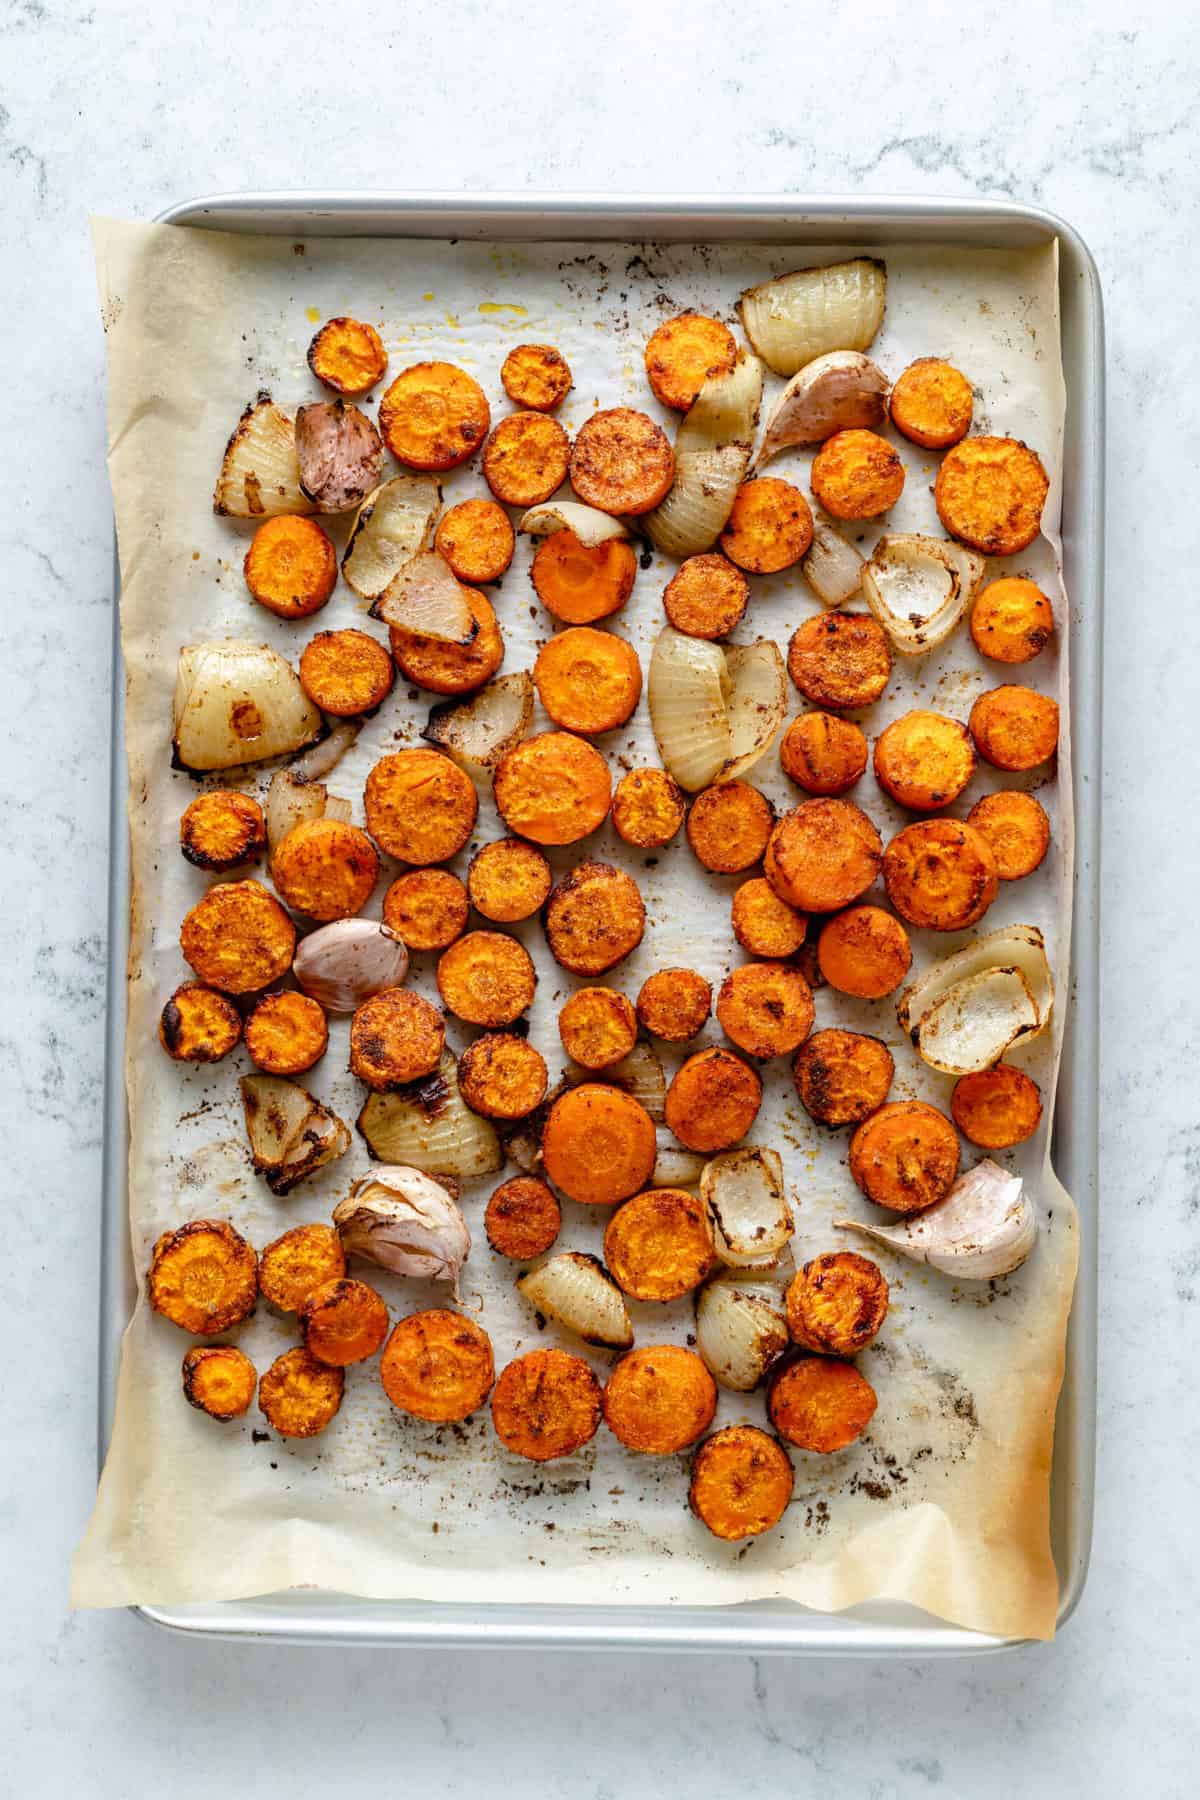 Overhead view of roasted carrots, onions, and garlic on sheet pan